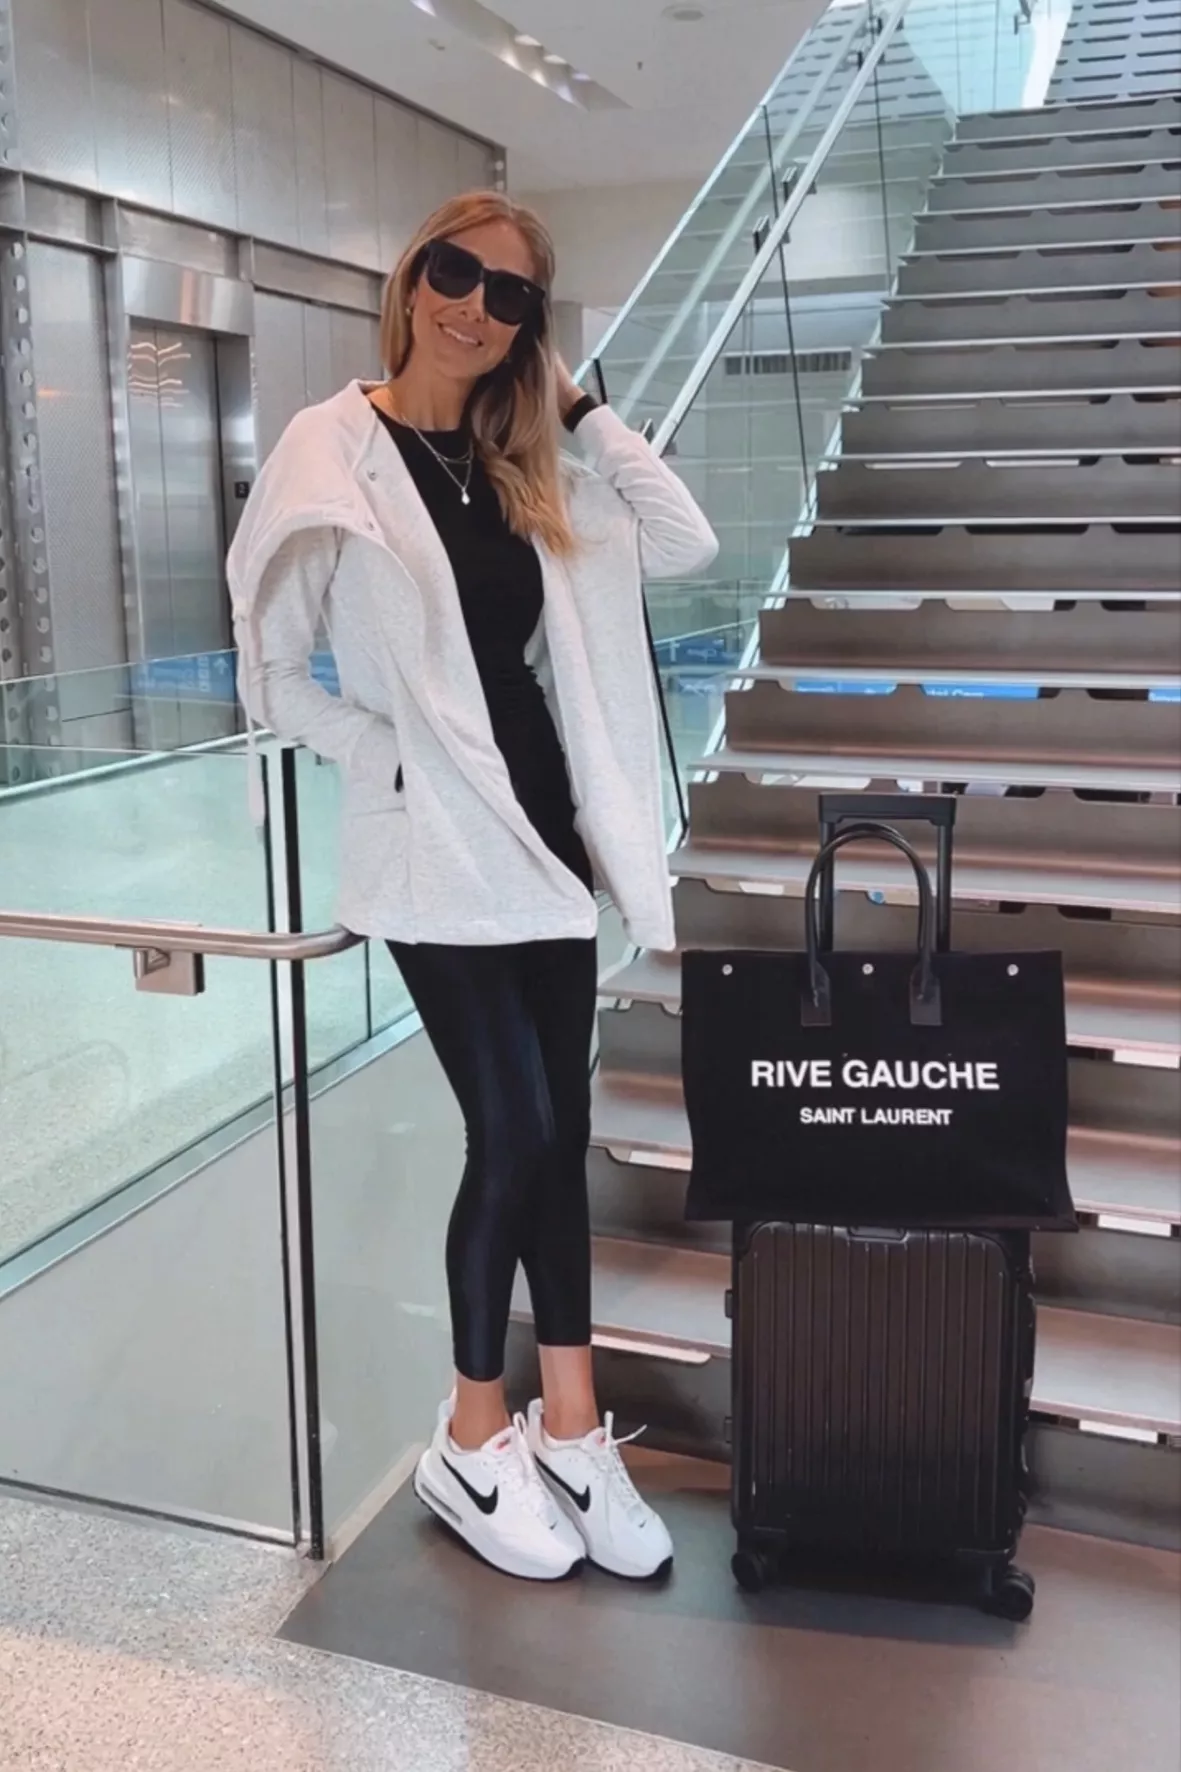 Elevated Travel Outfits ✈️ Sharing some go-to airport looks from @spanx  that are comfortable, practical, and super chic! SHOP all my